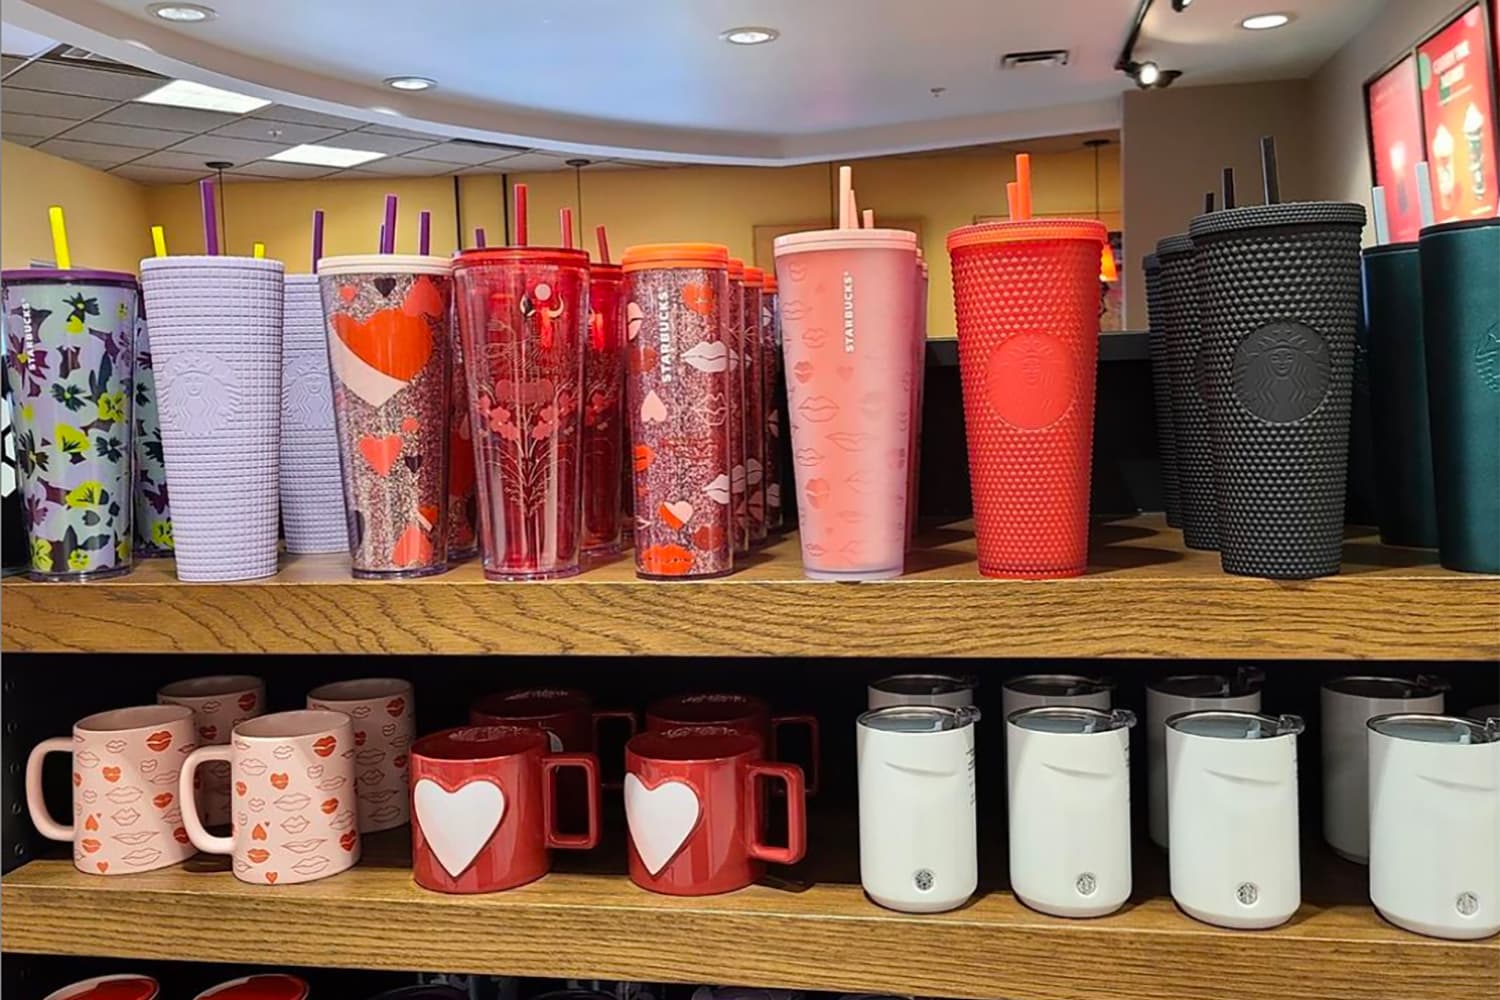 10 Pretty Starbucks Valentine Tumblers from  - Let's Eat Cake